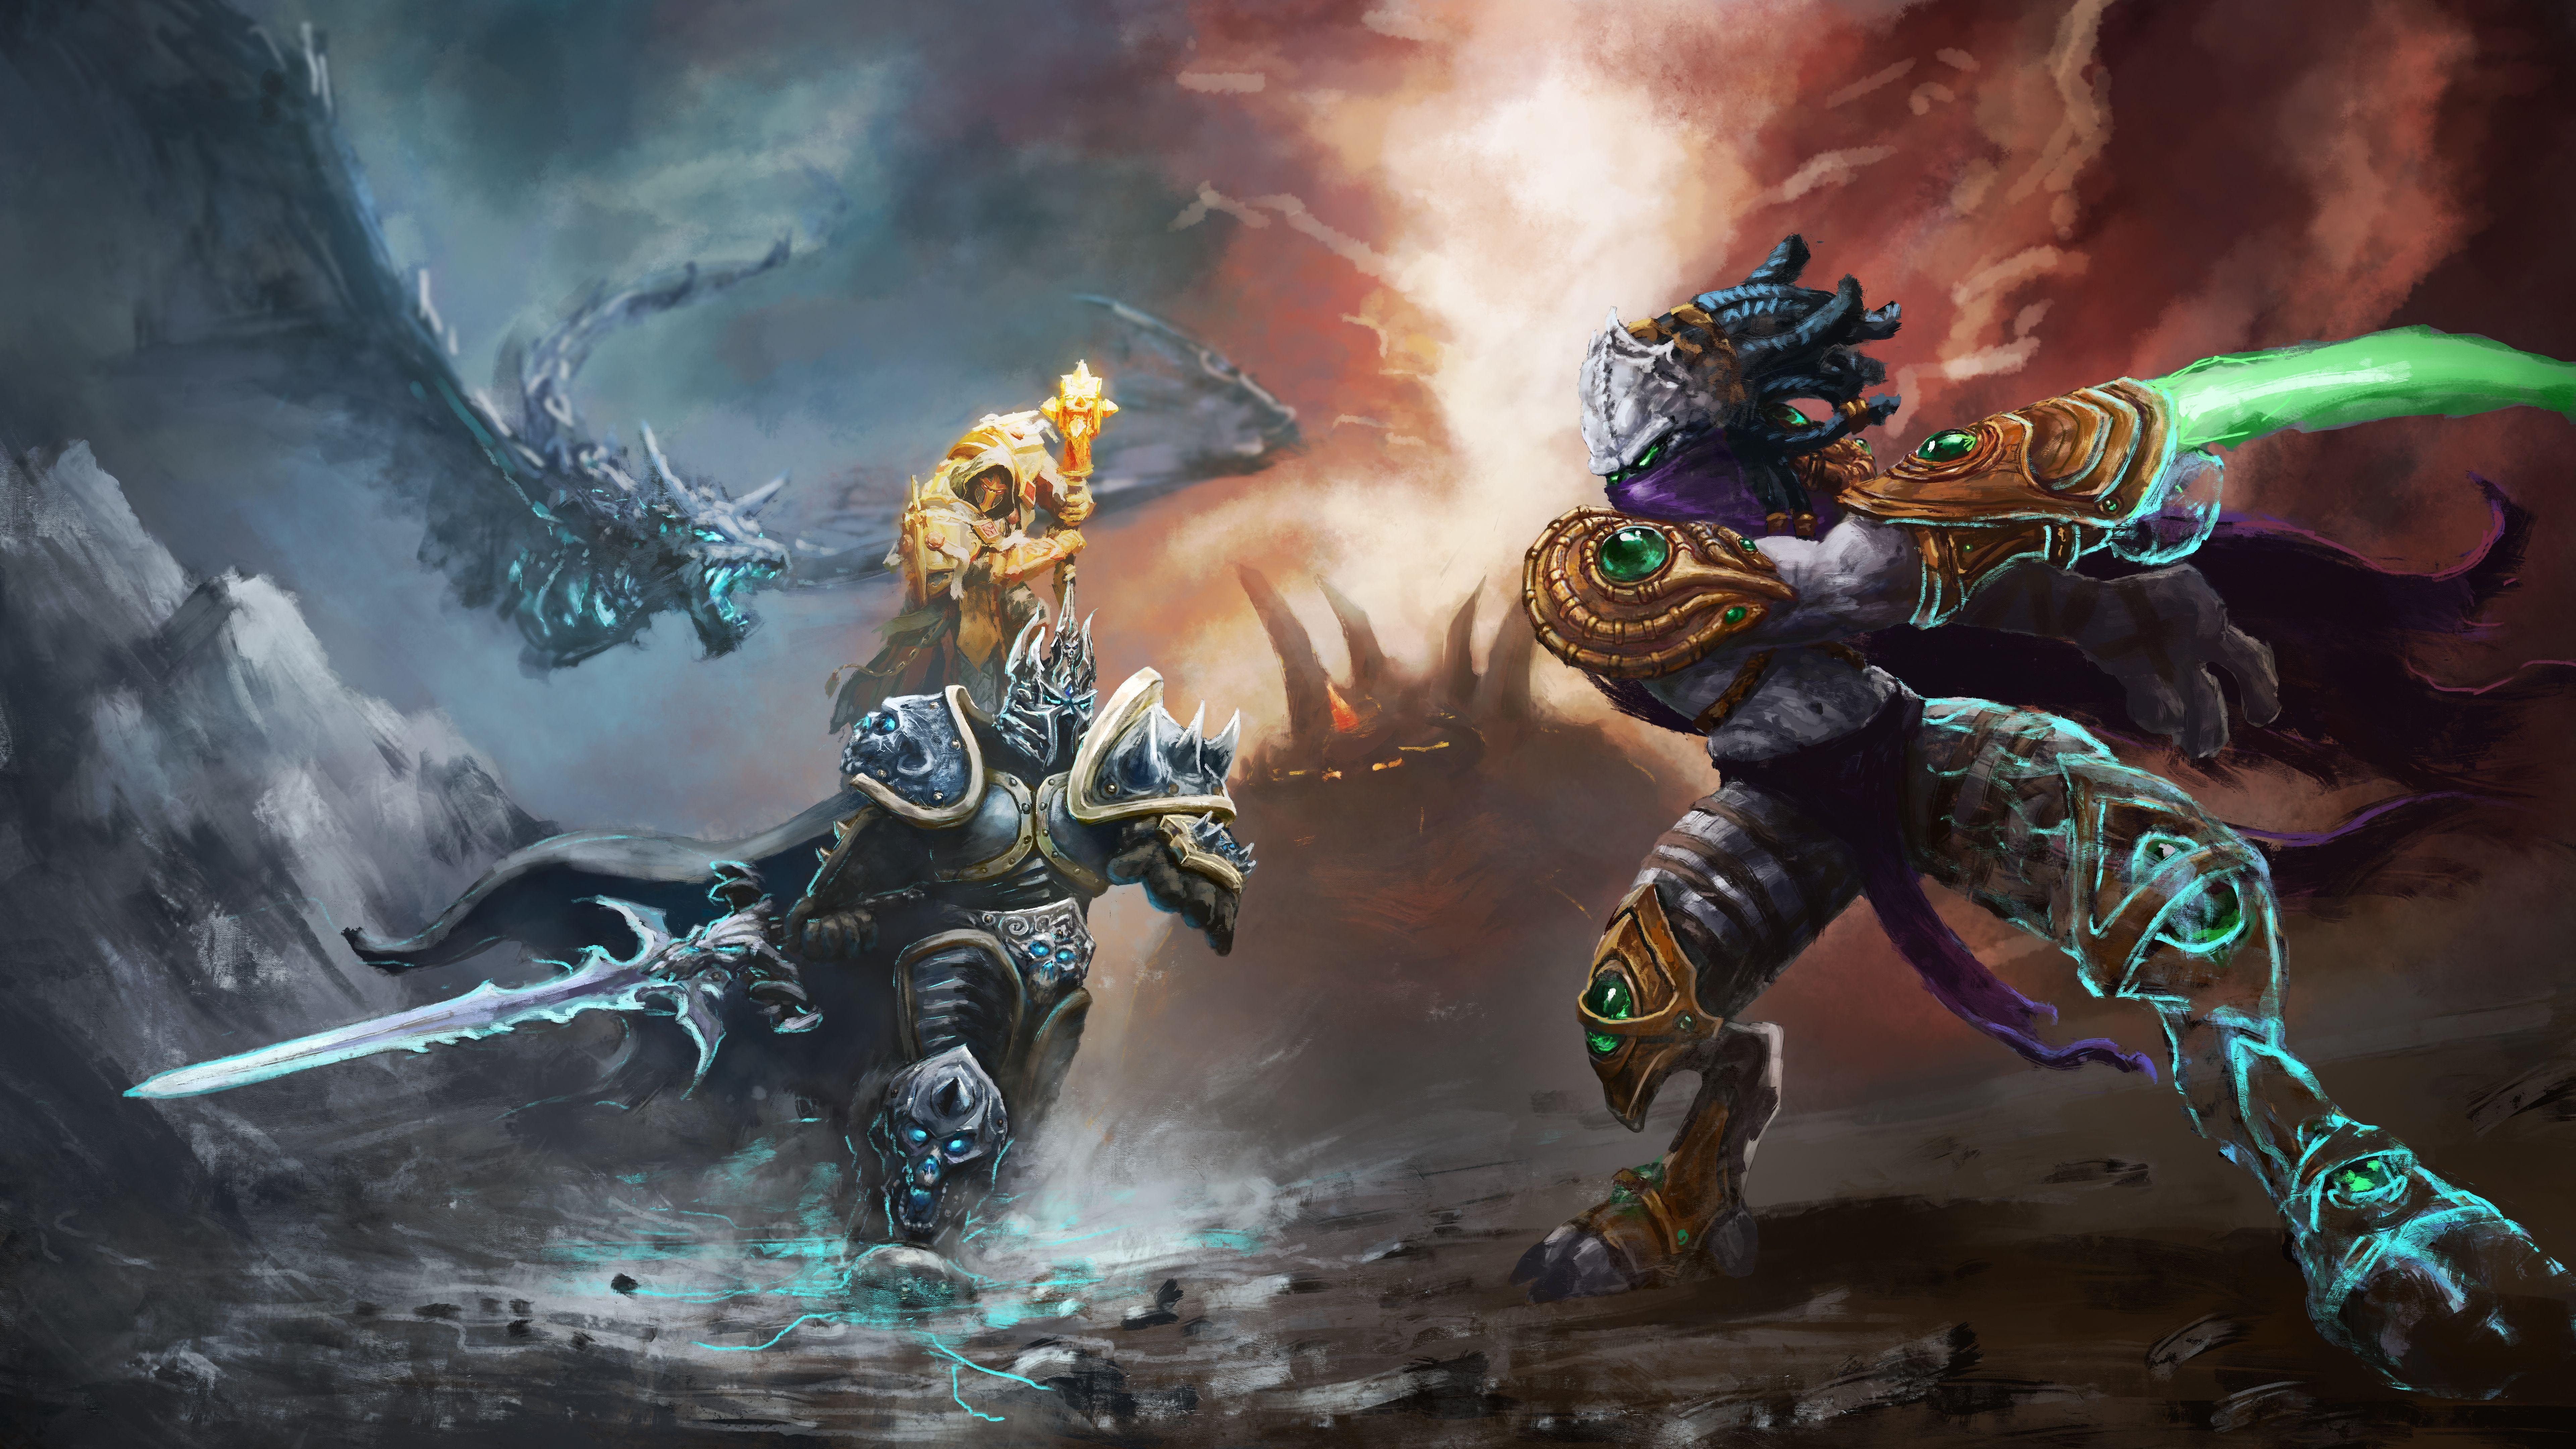 190+ Heroes of the Storm HD Wallpapers and Backgrounds